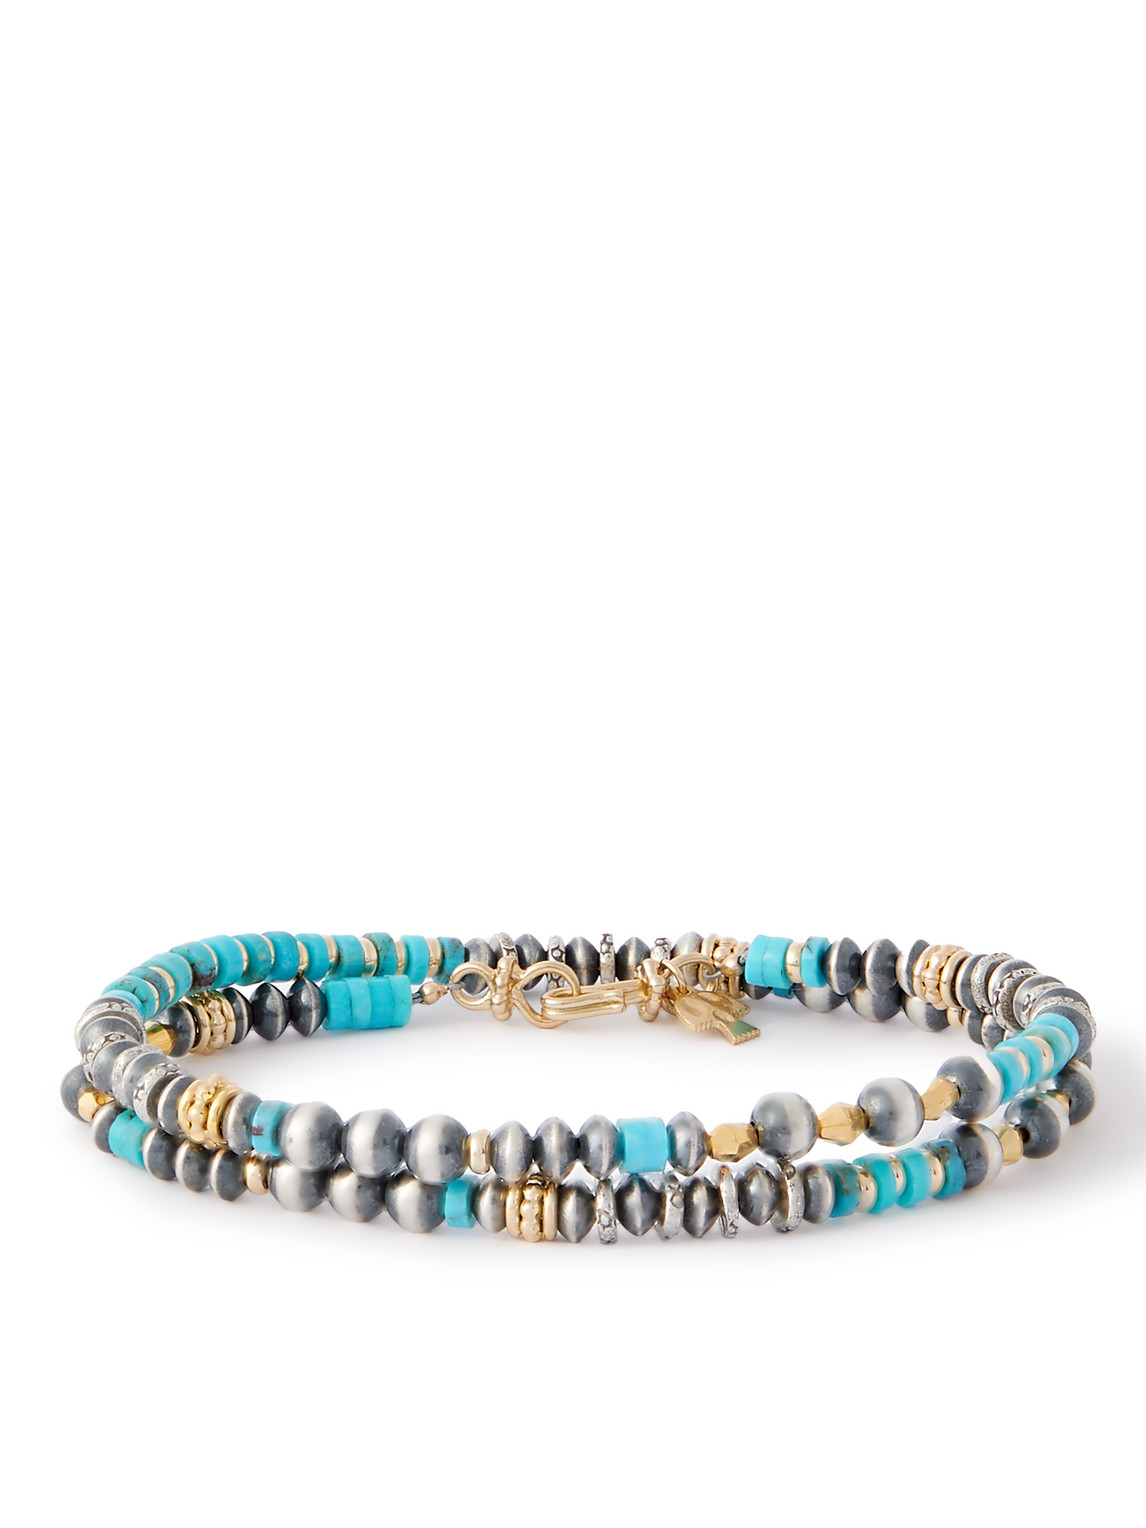 Peyote Bird Le Mans Silver, Gold-plated And Turquoise Beaded Wrap Bracelet In Unknown